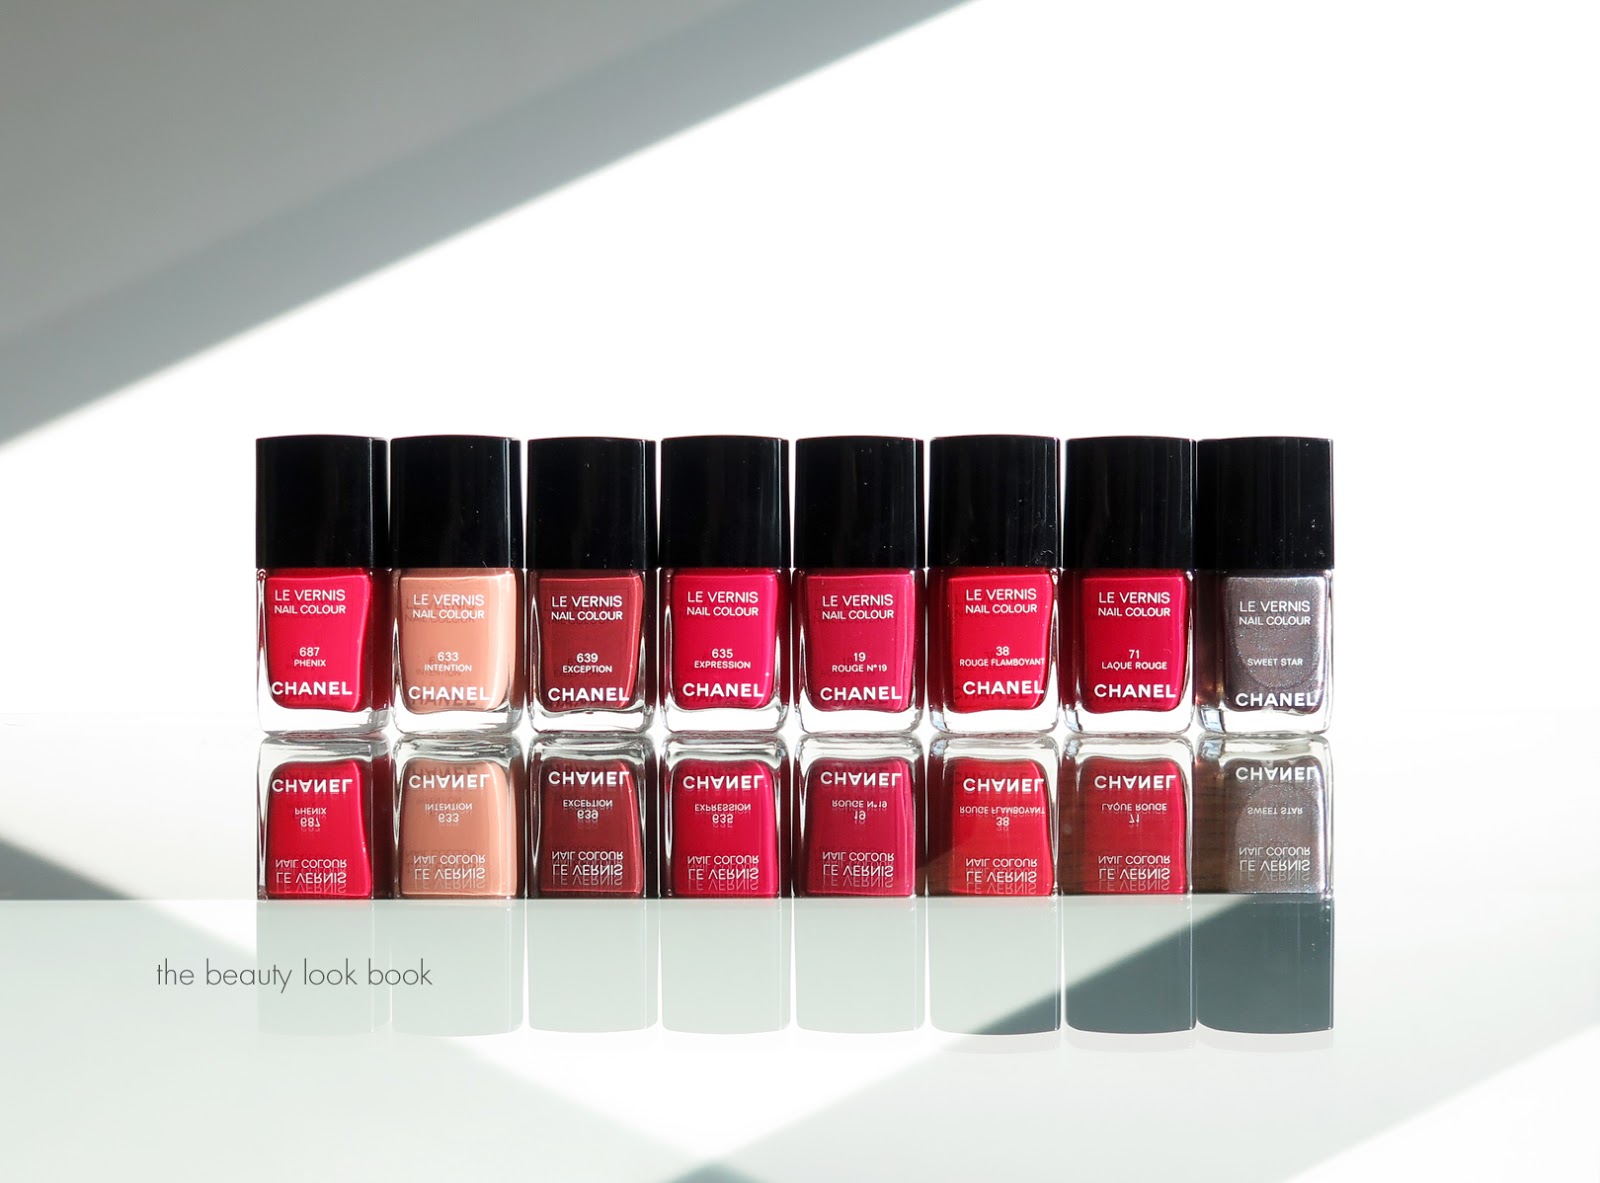 Sneak Peek: New Chanel Le Vernis Shades - The Beauty Look Book